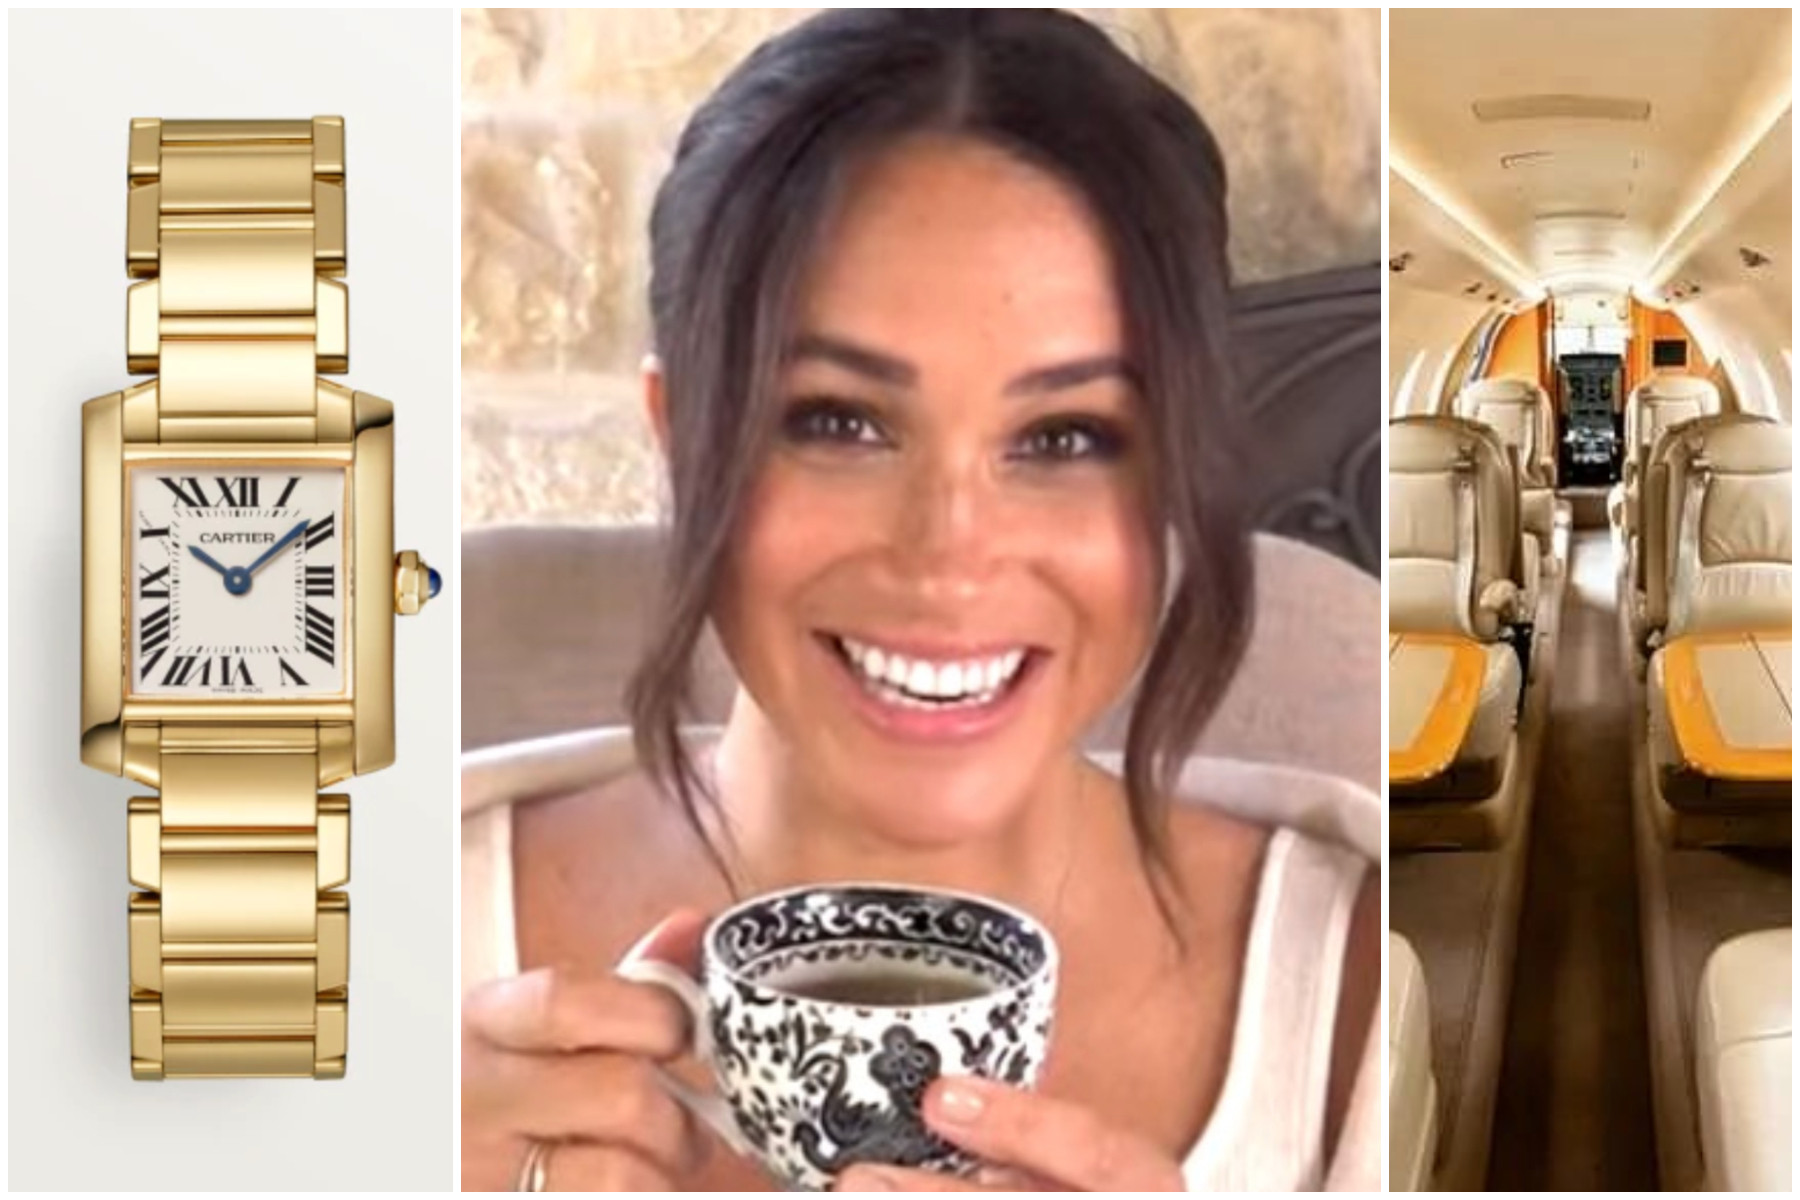 Meghan Markle sure knows how to live the high life, spending on Cartier and private jet travel. Photos: Cartier; @archewell_hm, @jetoptions/Instagram